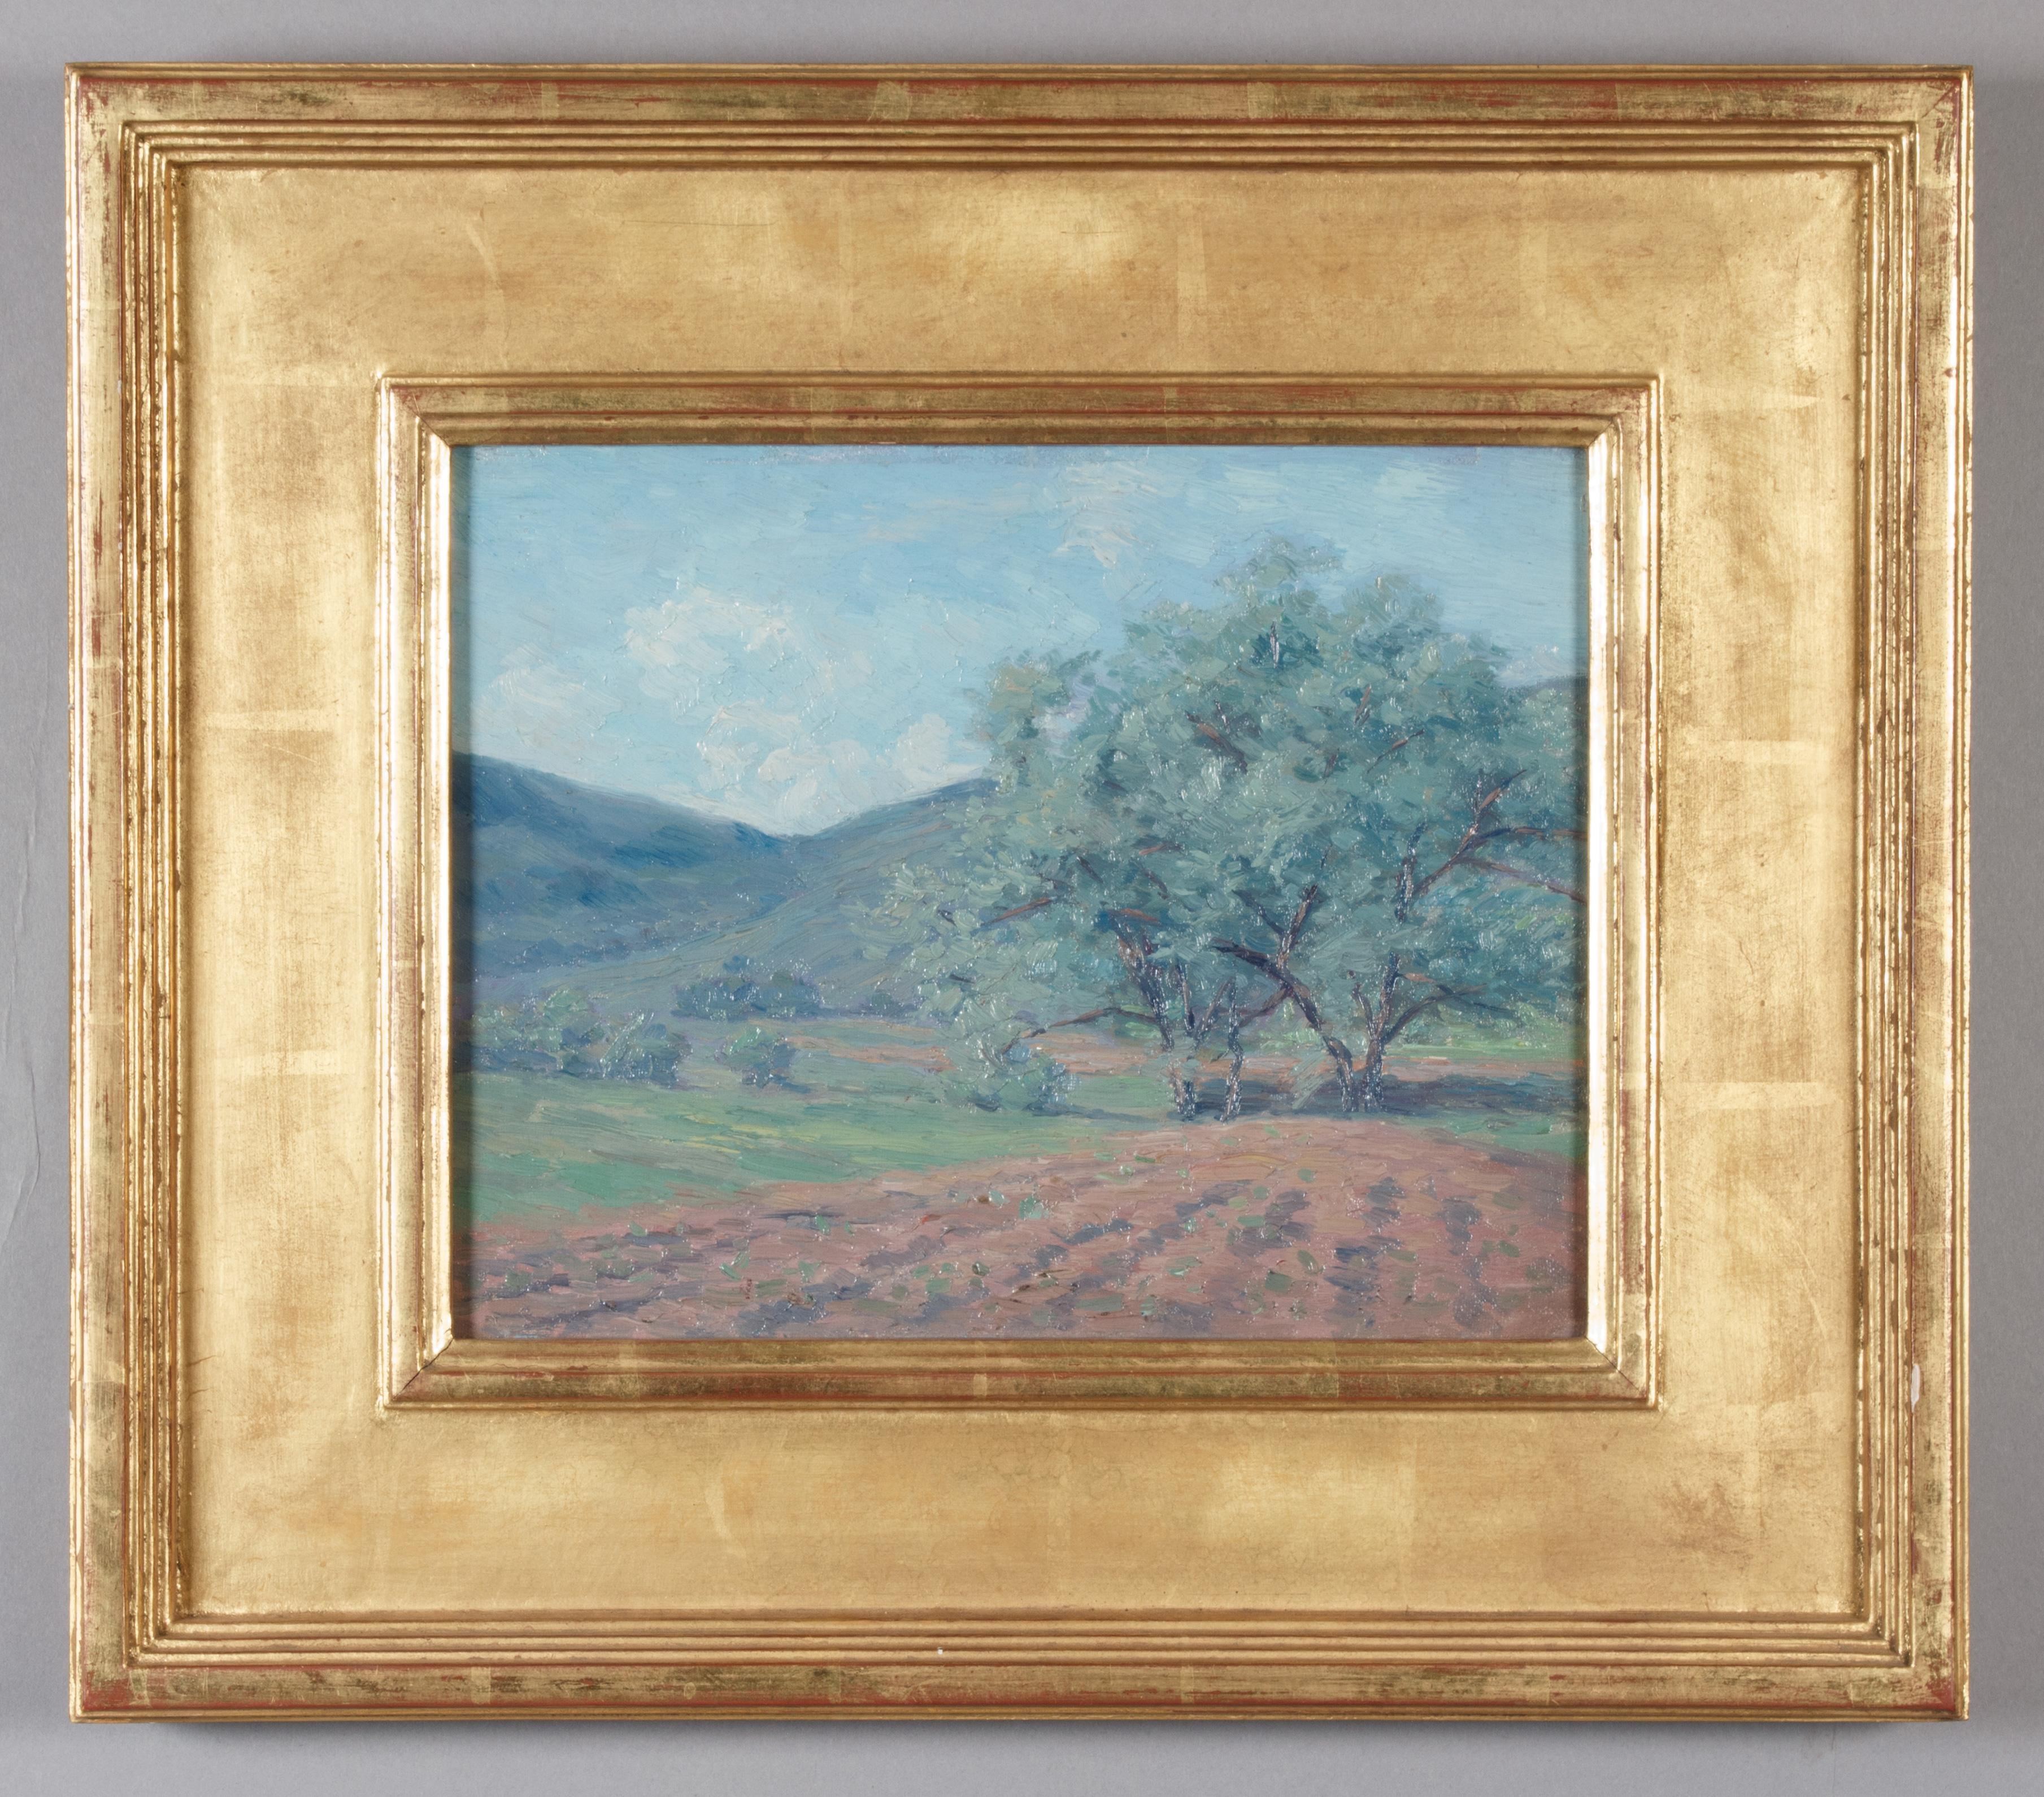 William S. Butz Landscape Painting - Woodstock: Field with Trees in Hilly Landscape